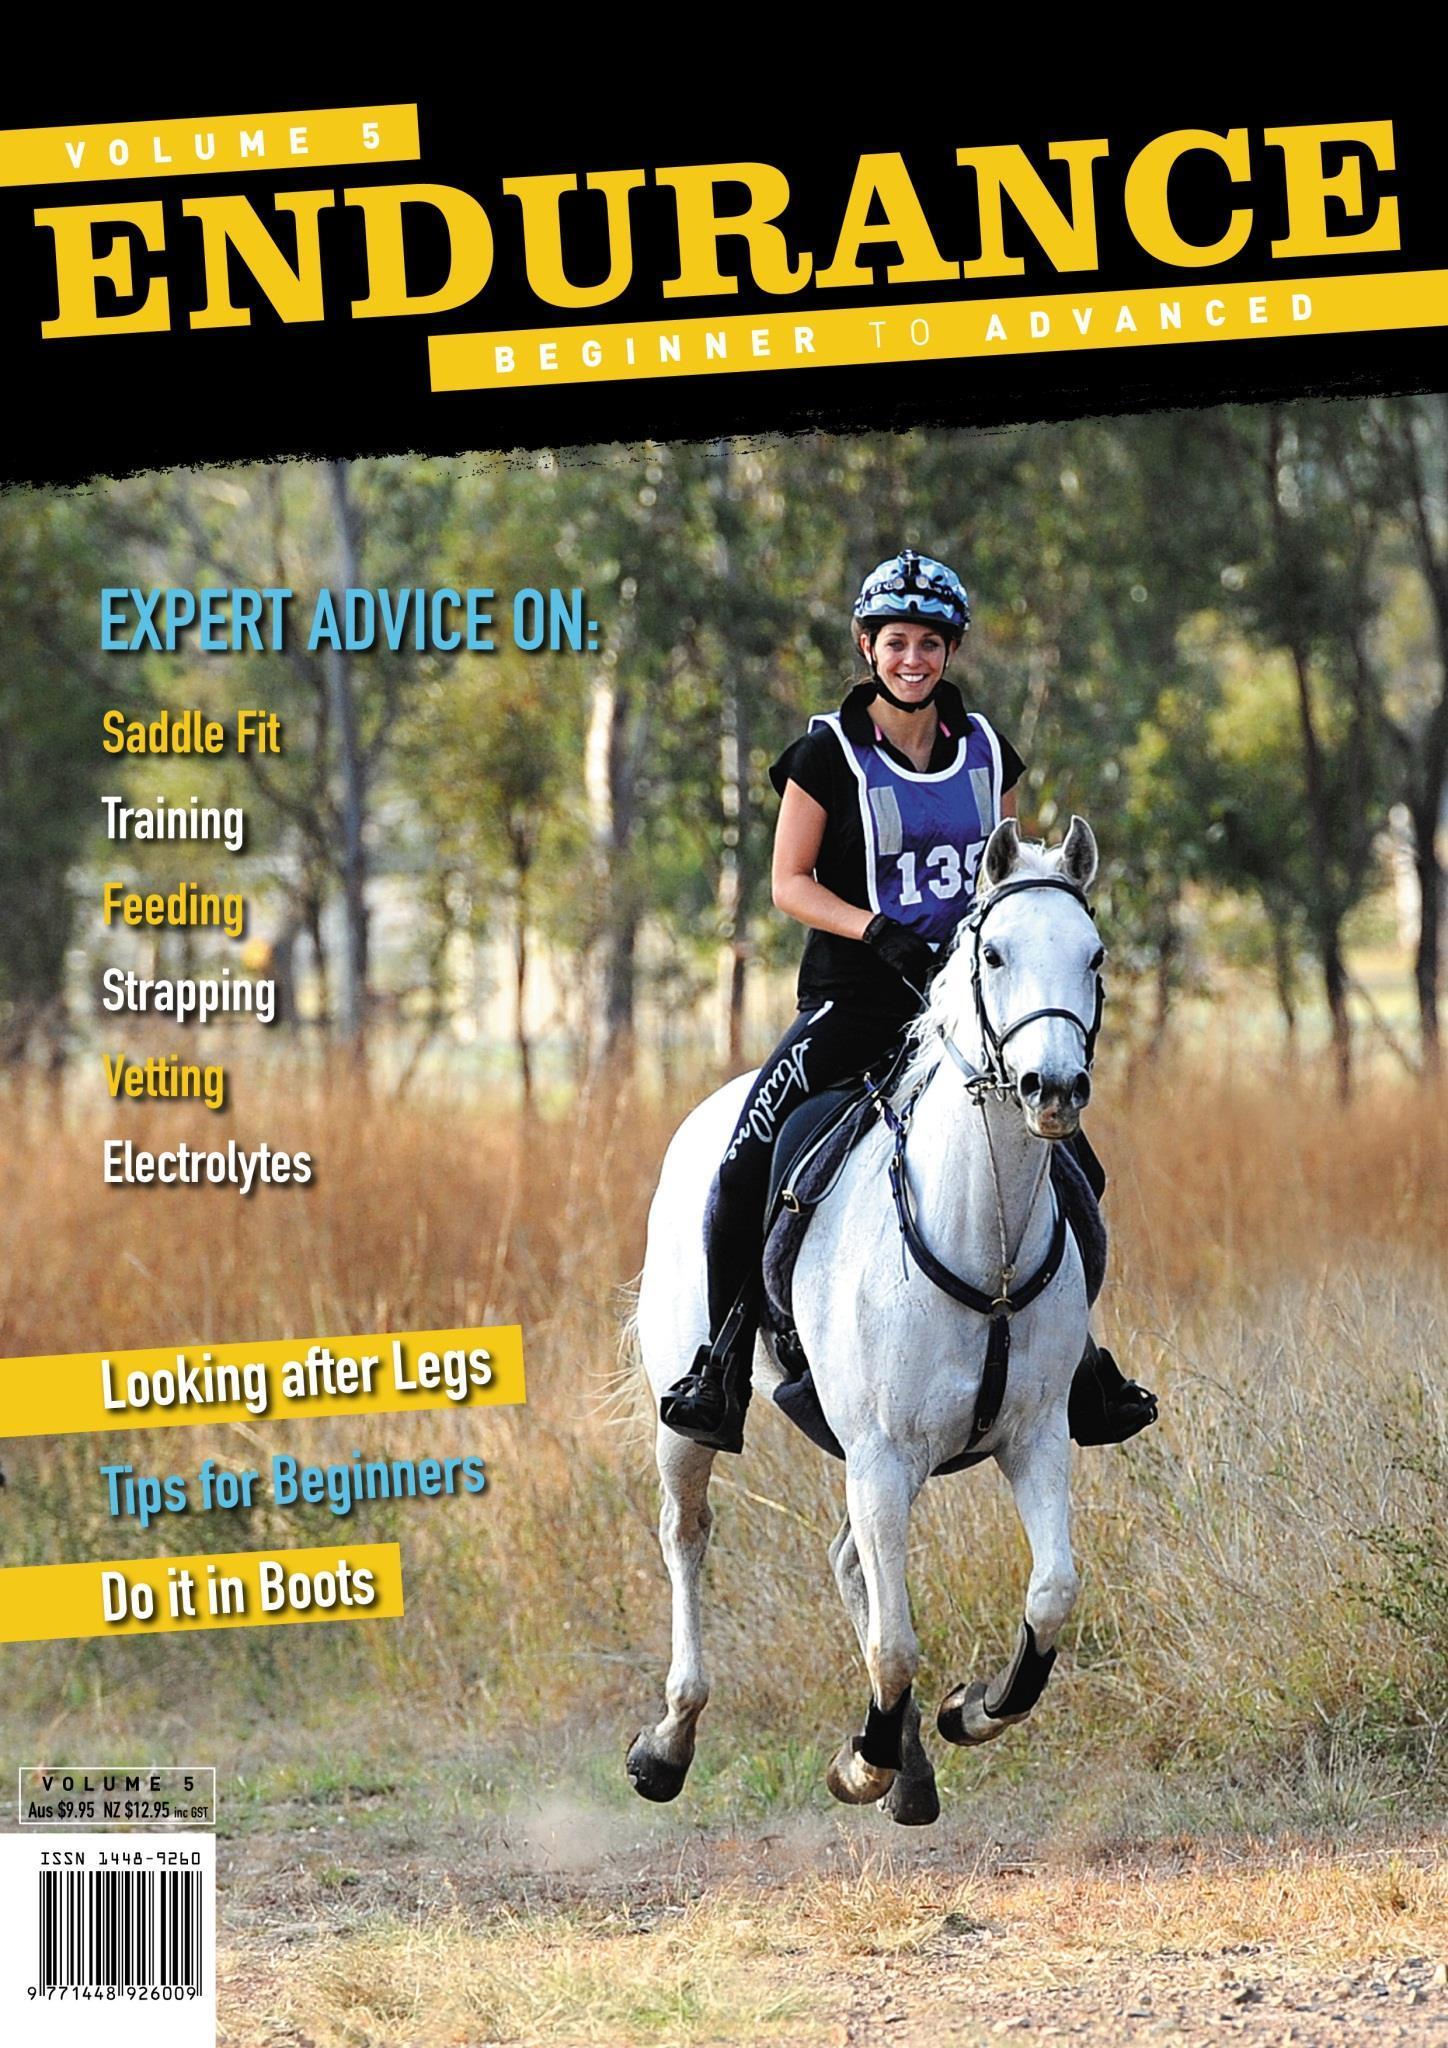 Endurance Magazine for Android - APK Download